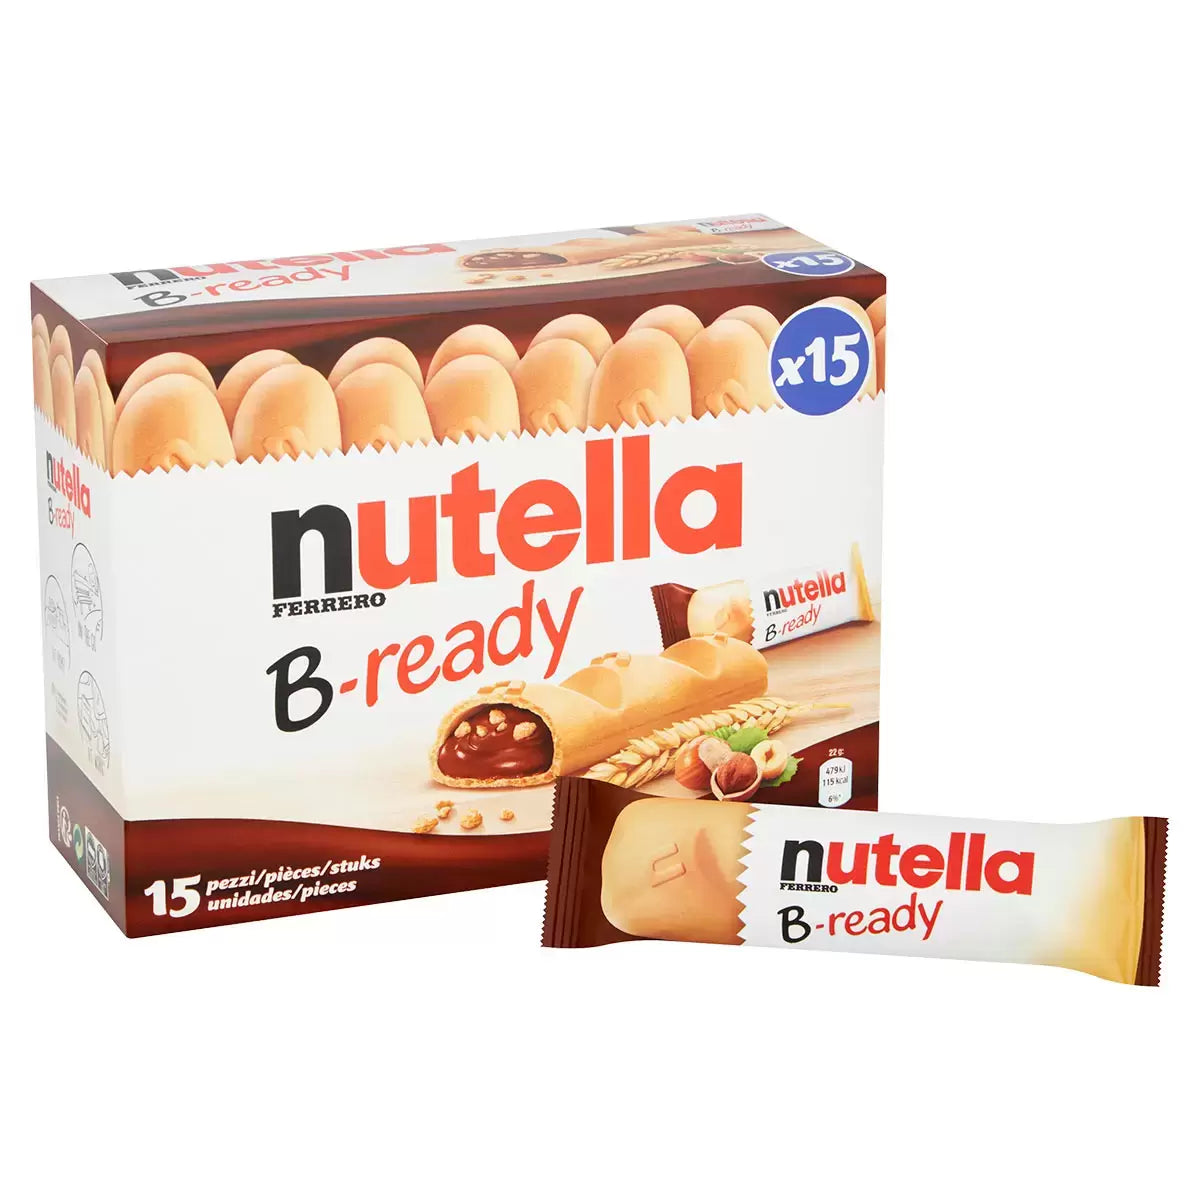 Nutella B-Ready - 22g (Pack of 15)